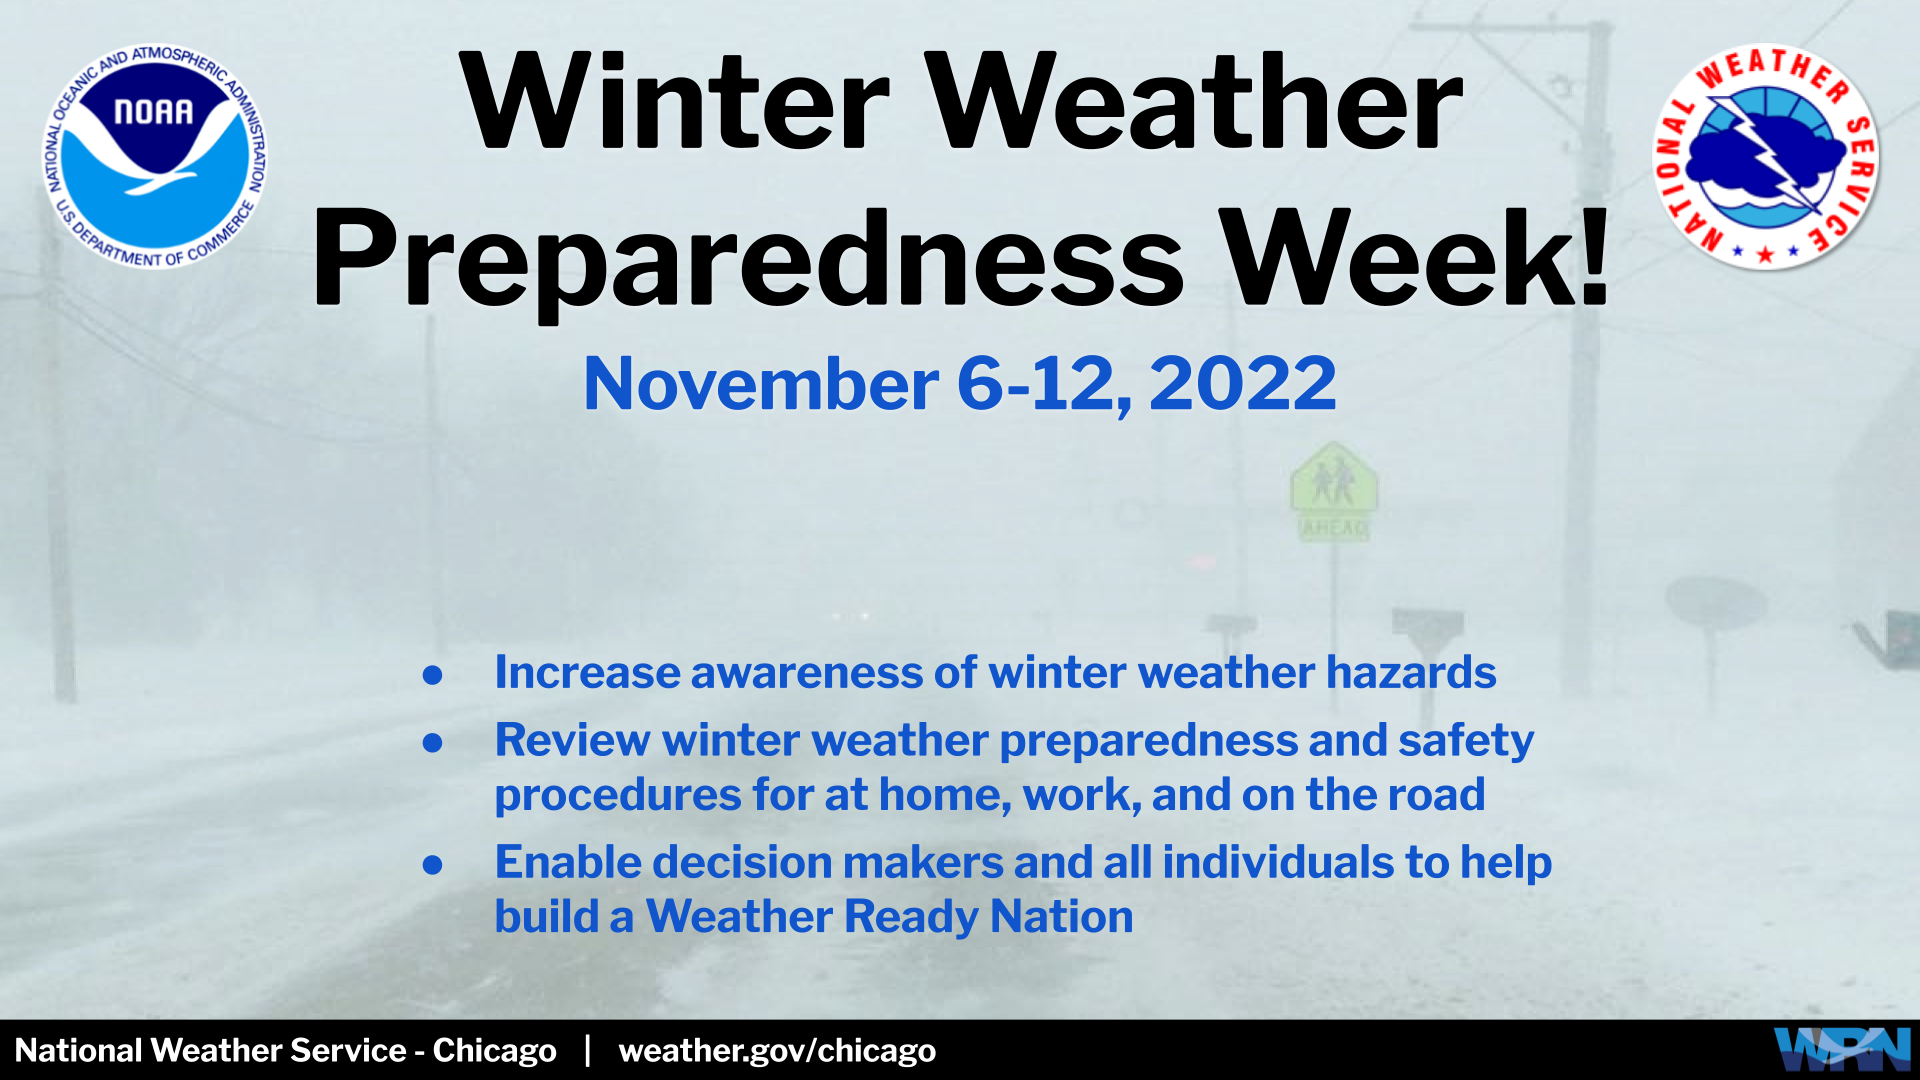 Announcement for Winter Weather Preparedness Week for Illinois and Indiana. November 6th through the 12th, 2022.